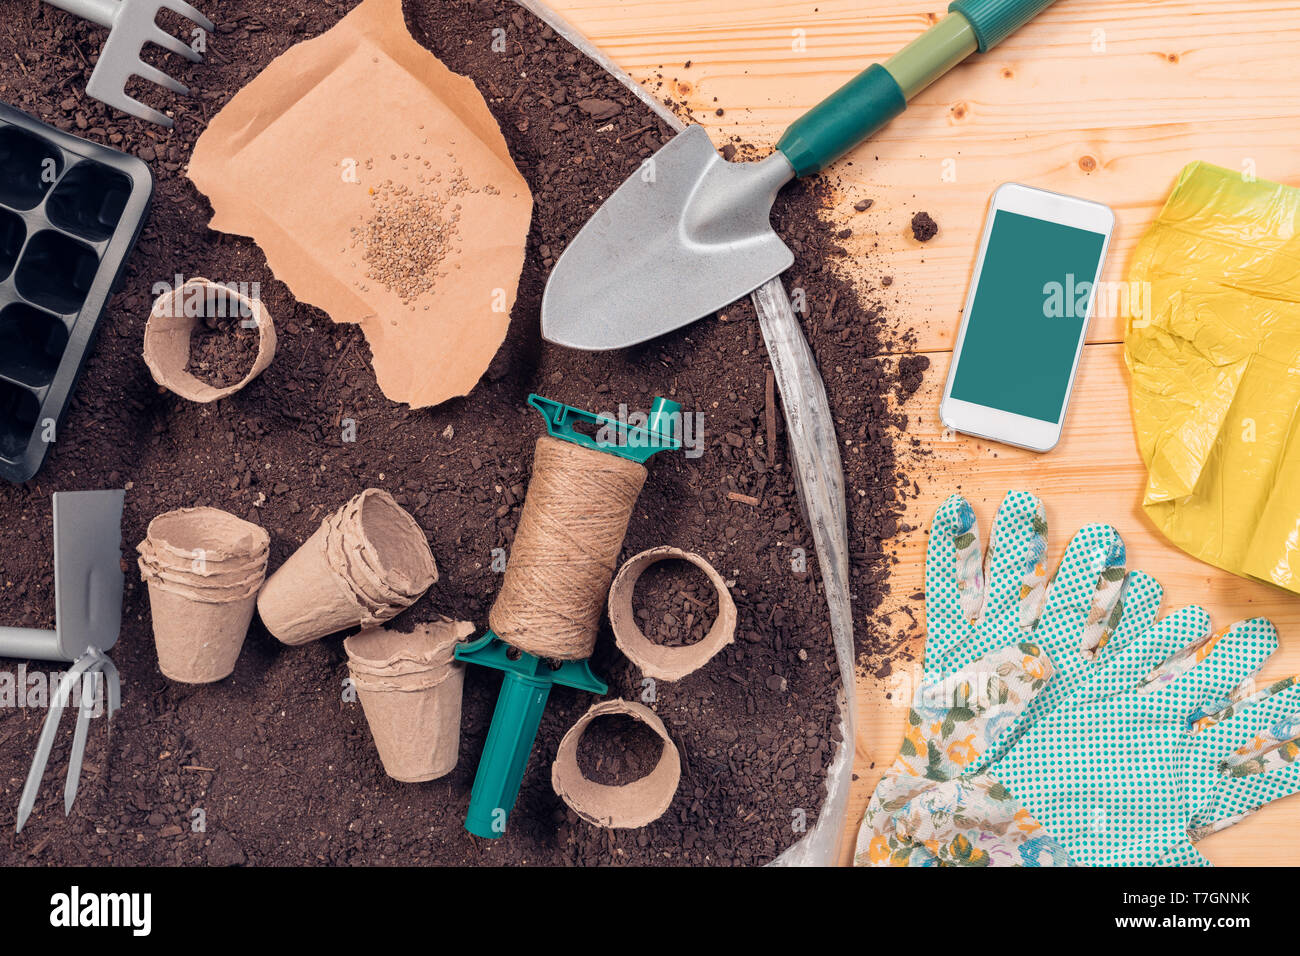 Smartphone screen mock up for gardening and seeding app with tools and equipment on potting soil Stock Photo